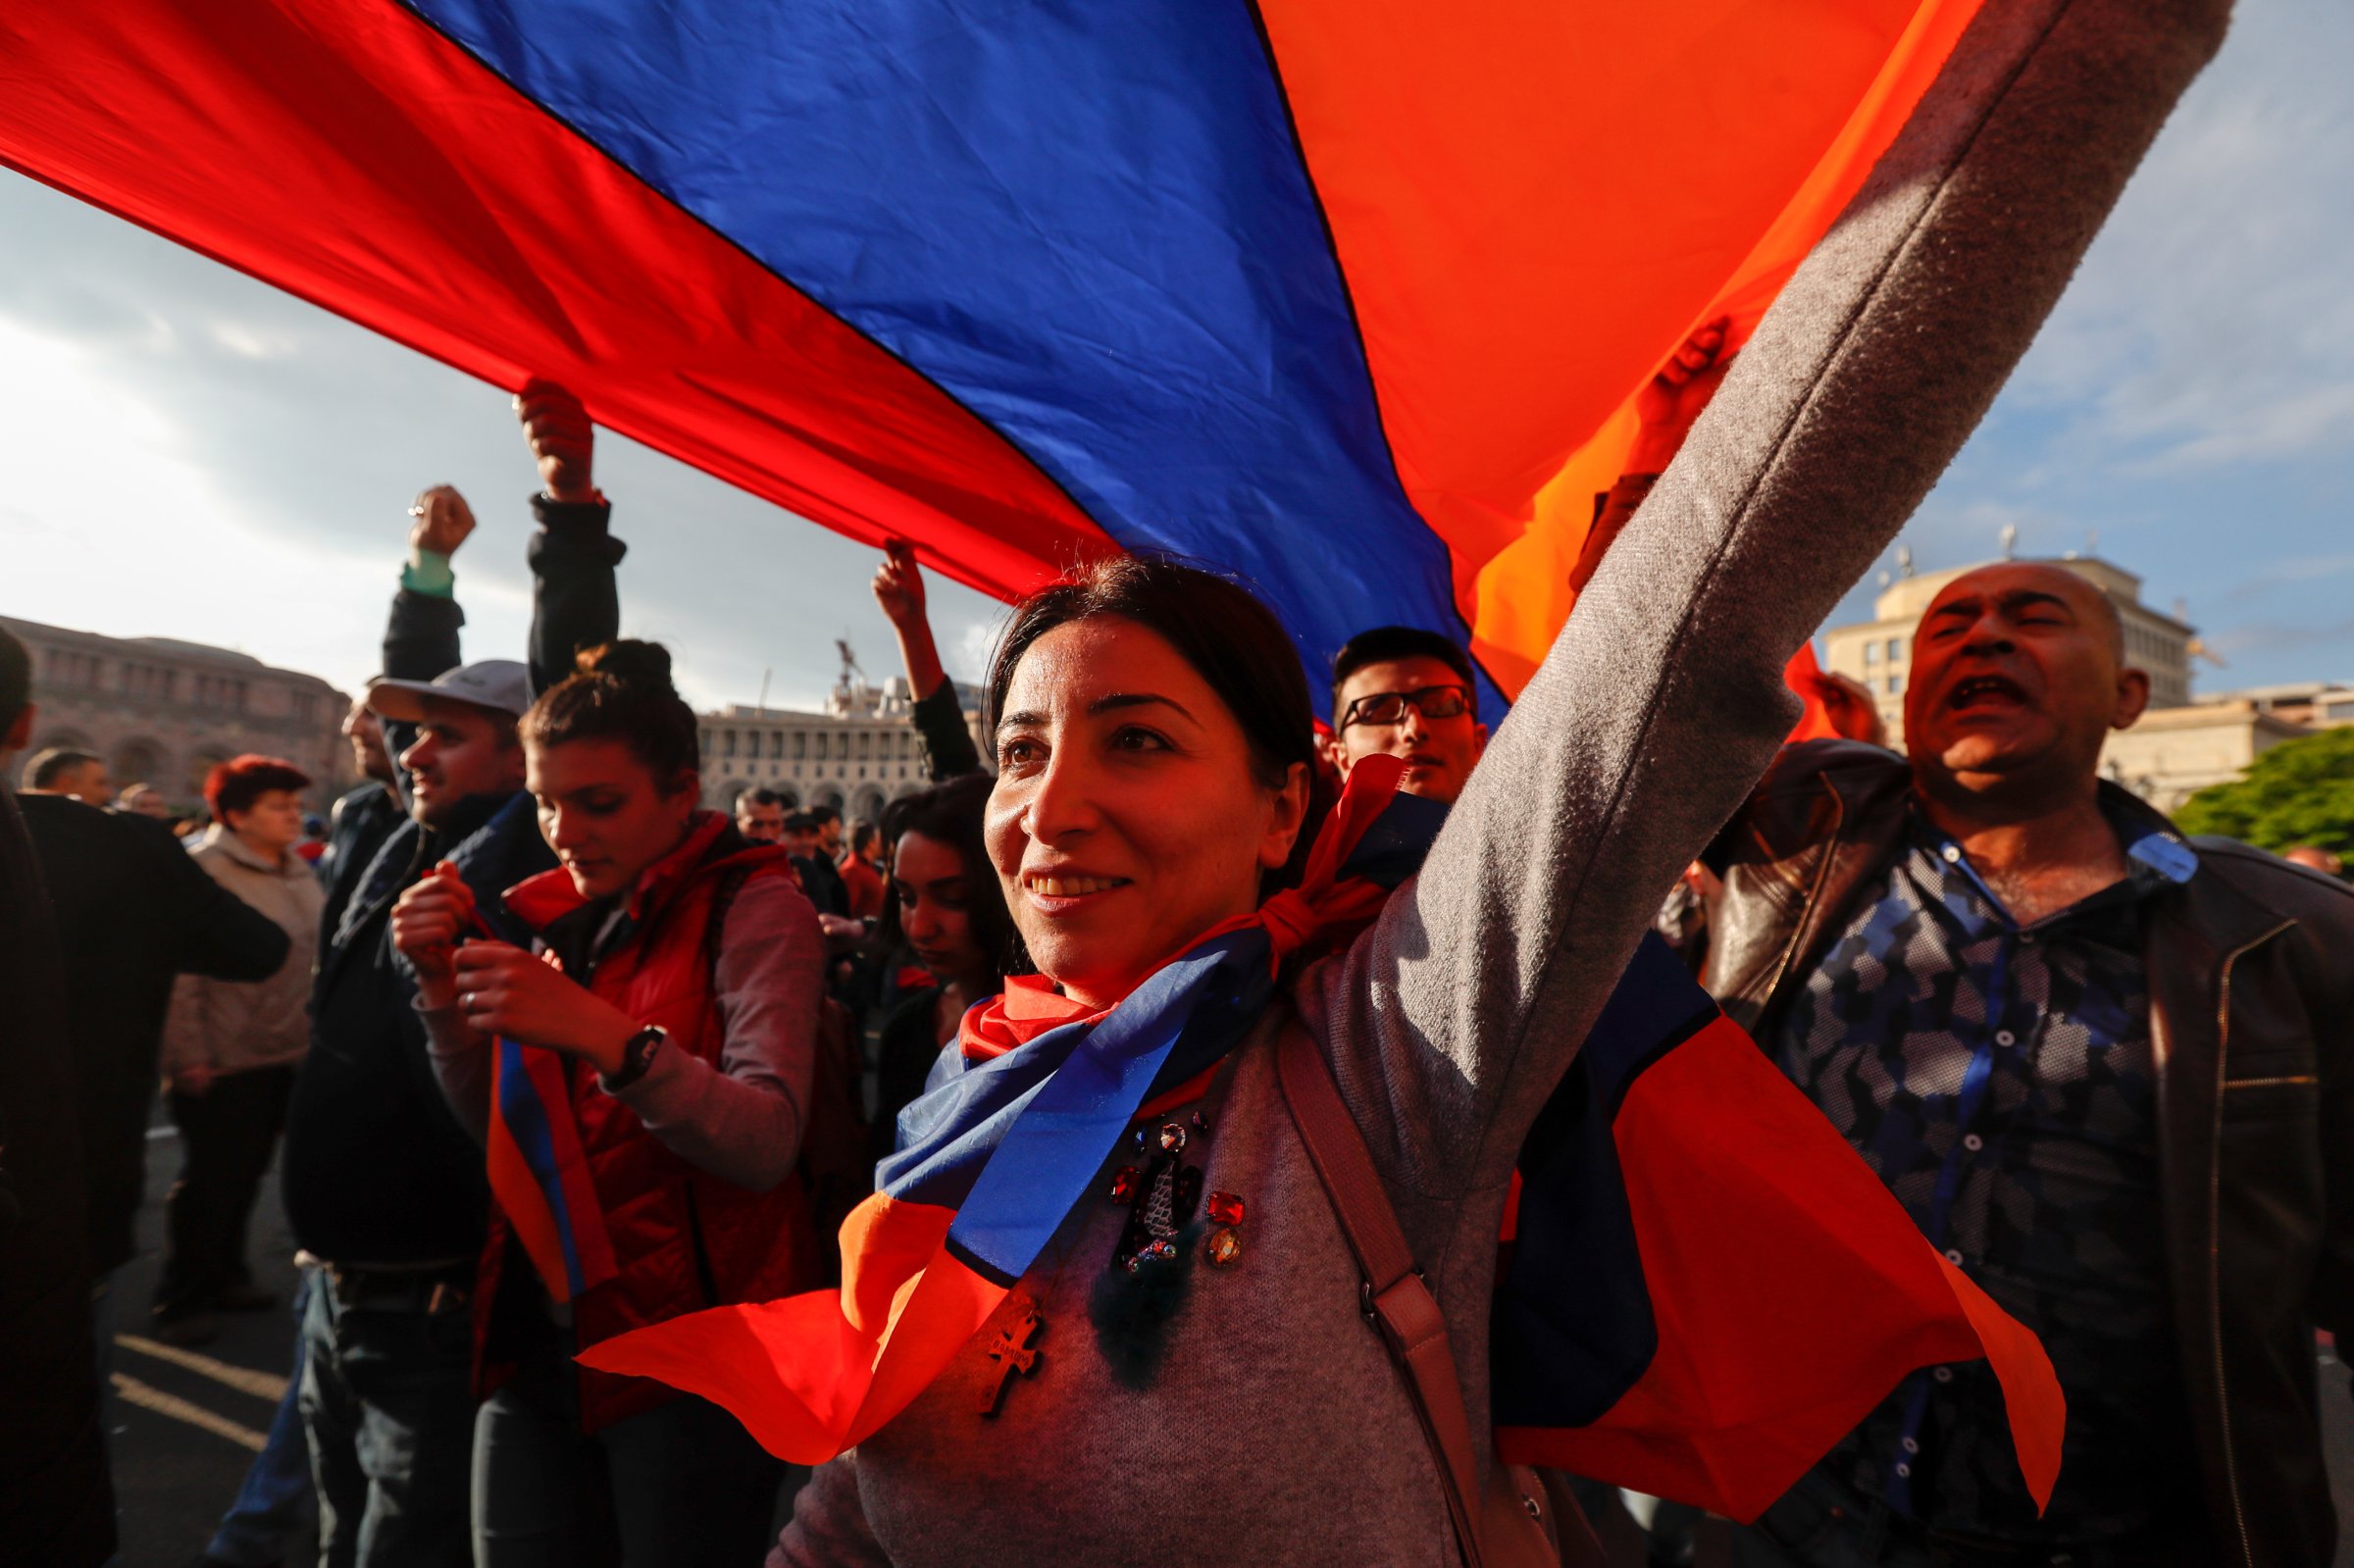 Mass protests calling for the resignation of Prime Minister Serzh Sargsyan in